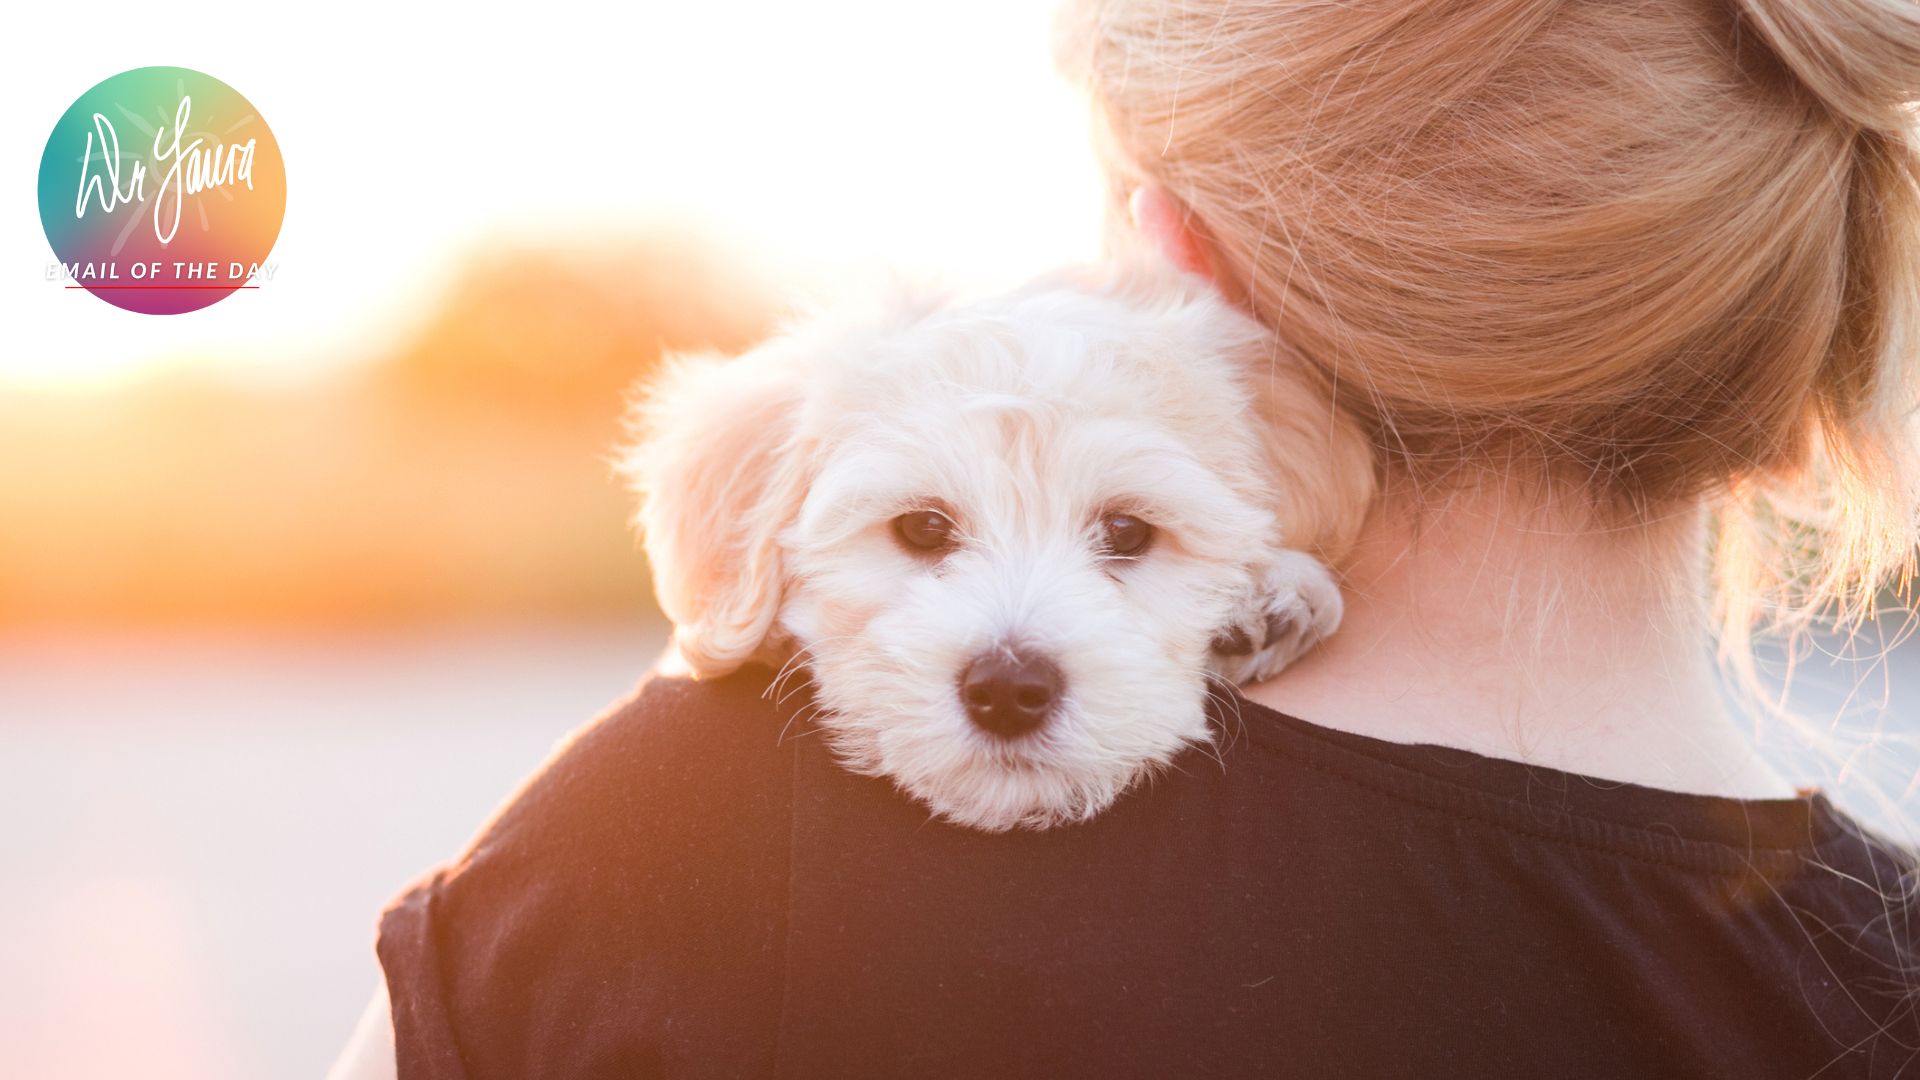 Woman holds white dog on her chest while dog's face rest on her shoulder